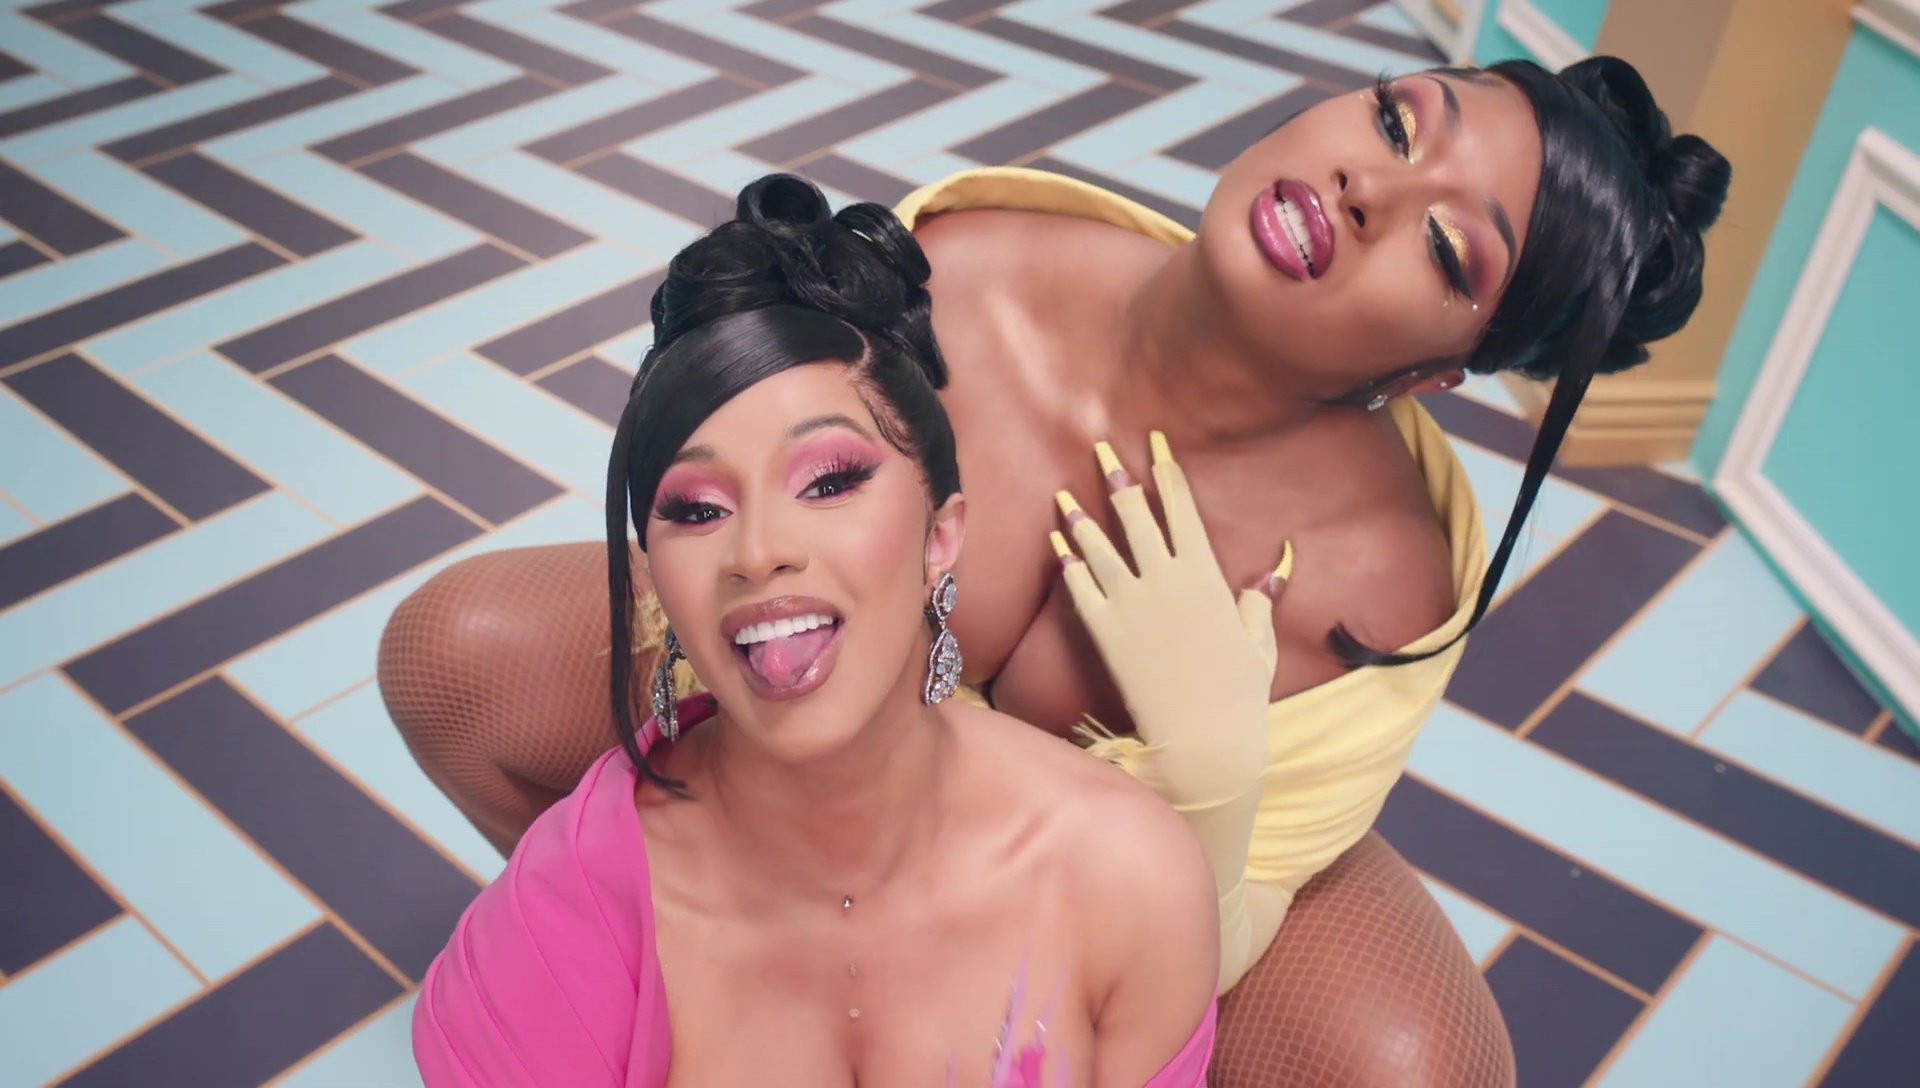 Cardi B and Megan Thee Stallion’s WAP is ‘most popular song to have sex to’, study finds